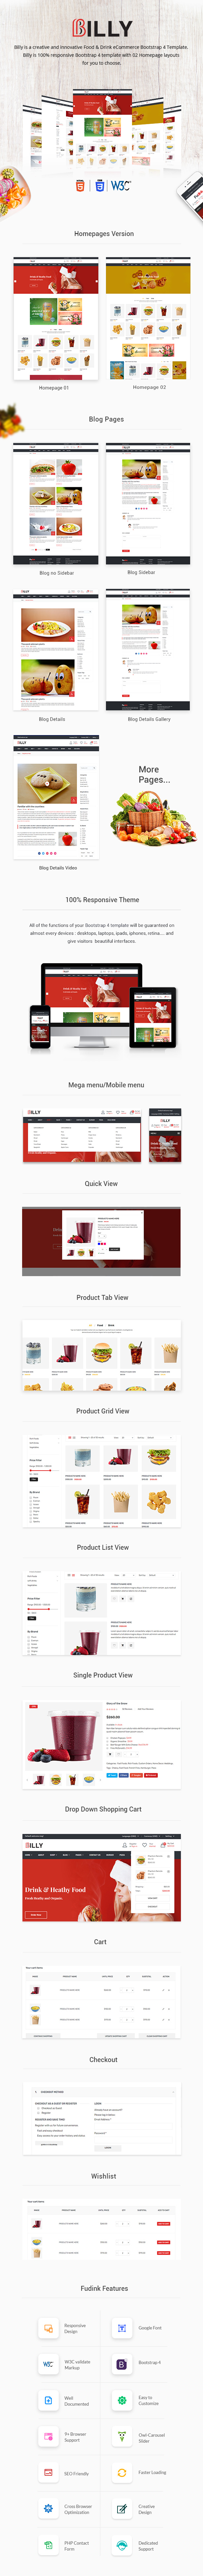 Billy - Food & Drink eCommerce Bootstrap 4 HTML Template